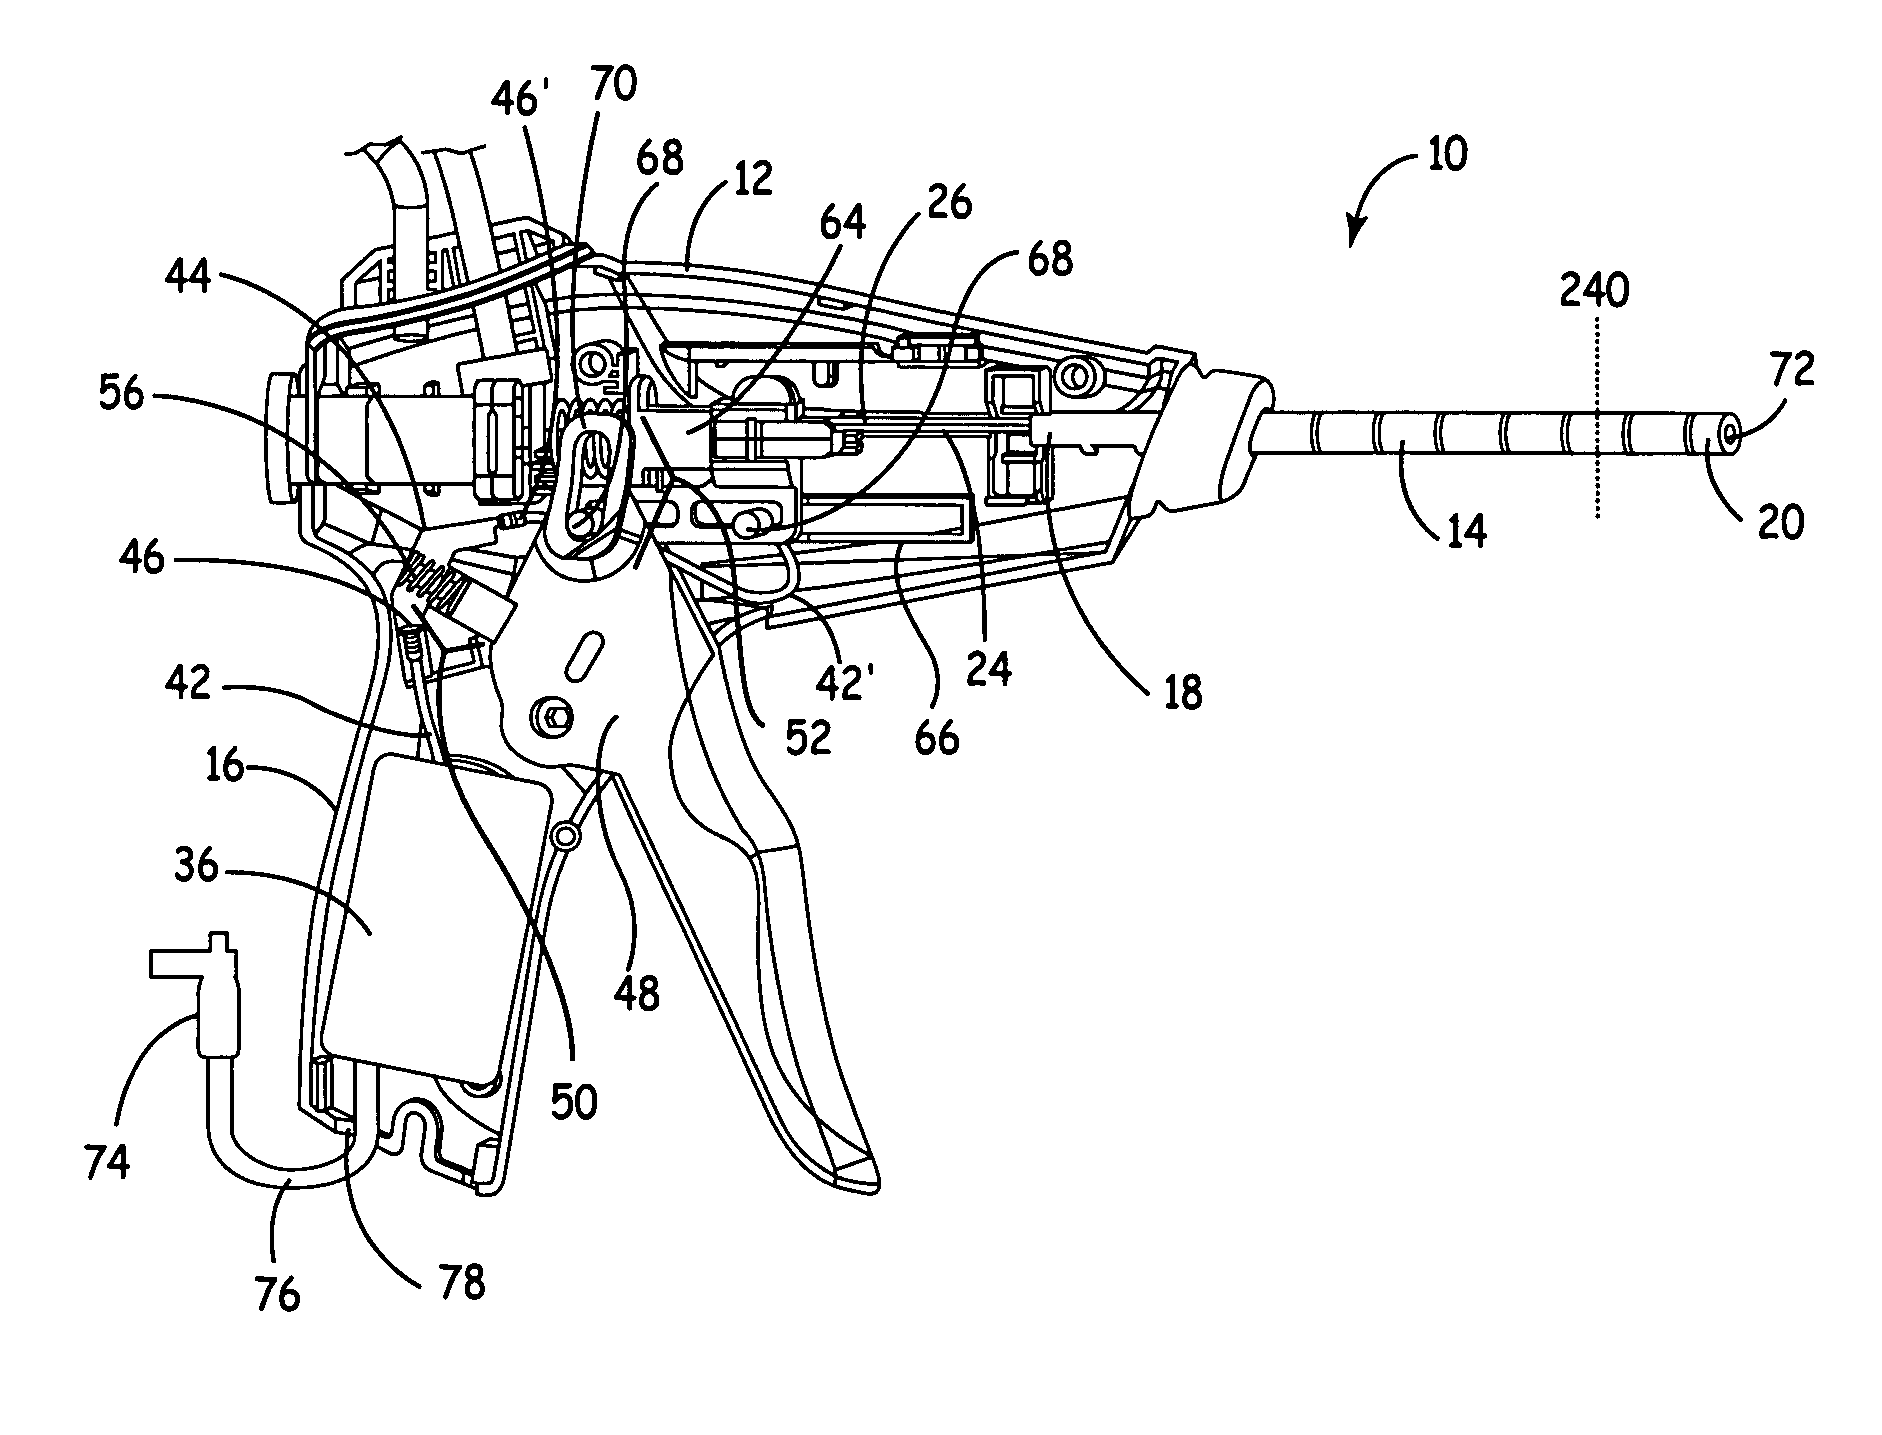 TUNA device with integrated saline reservoir